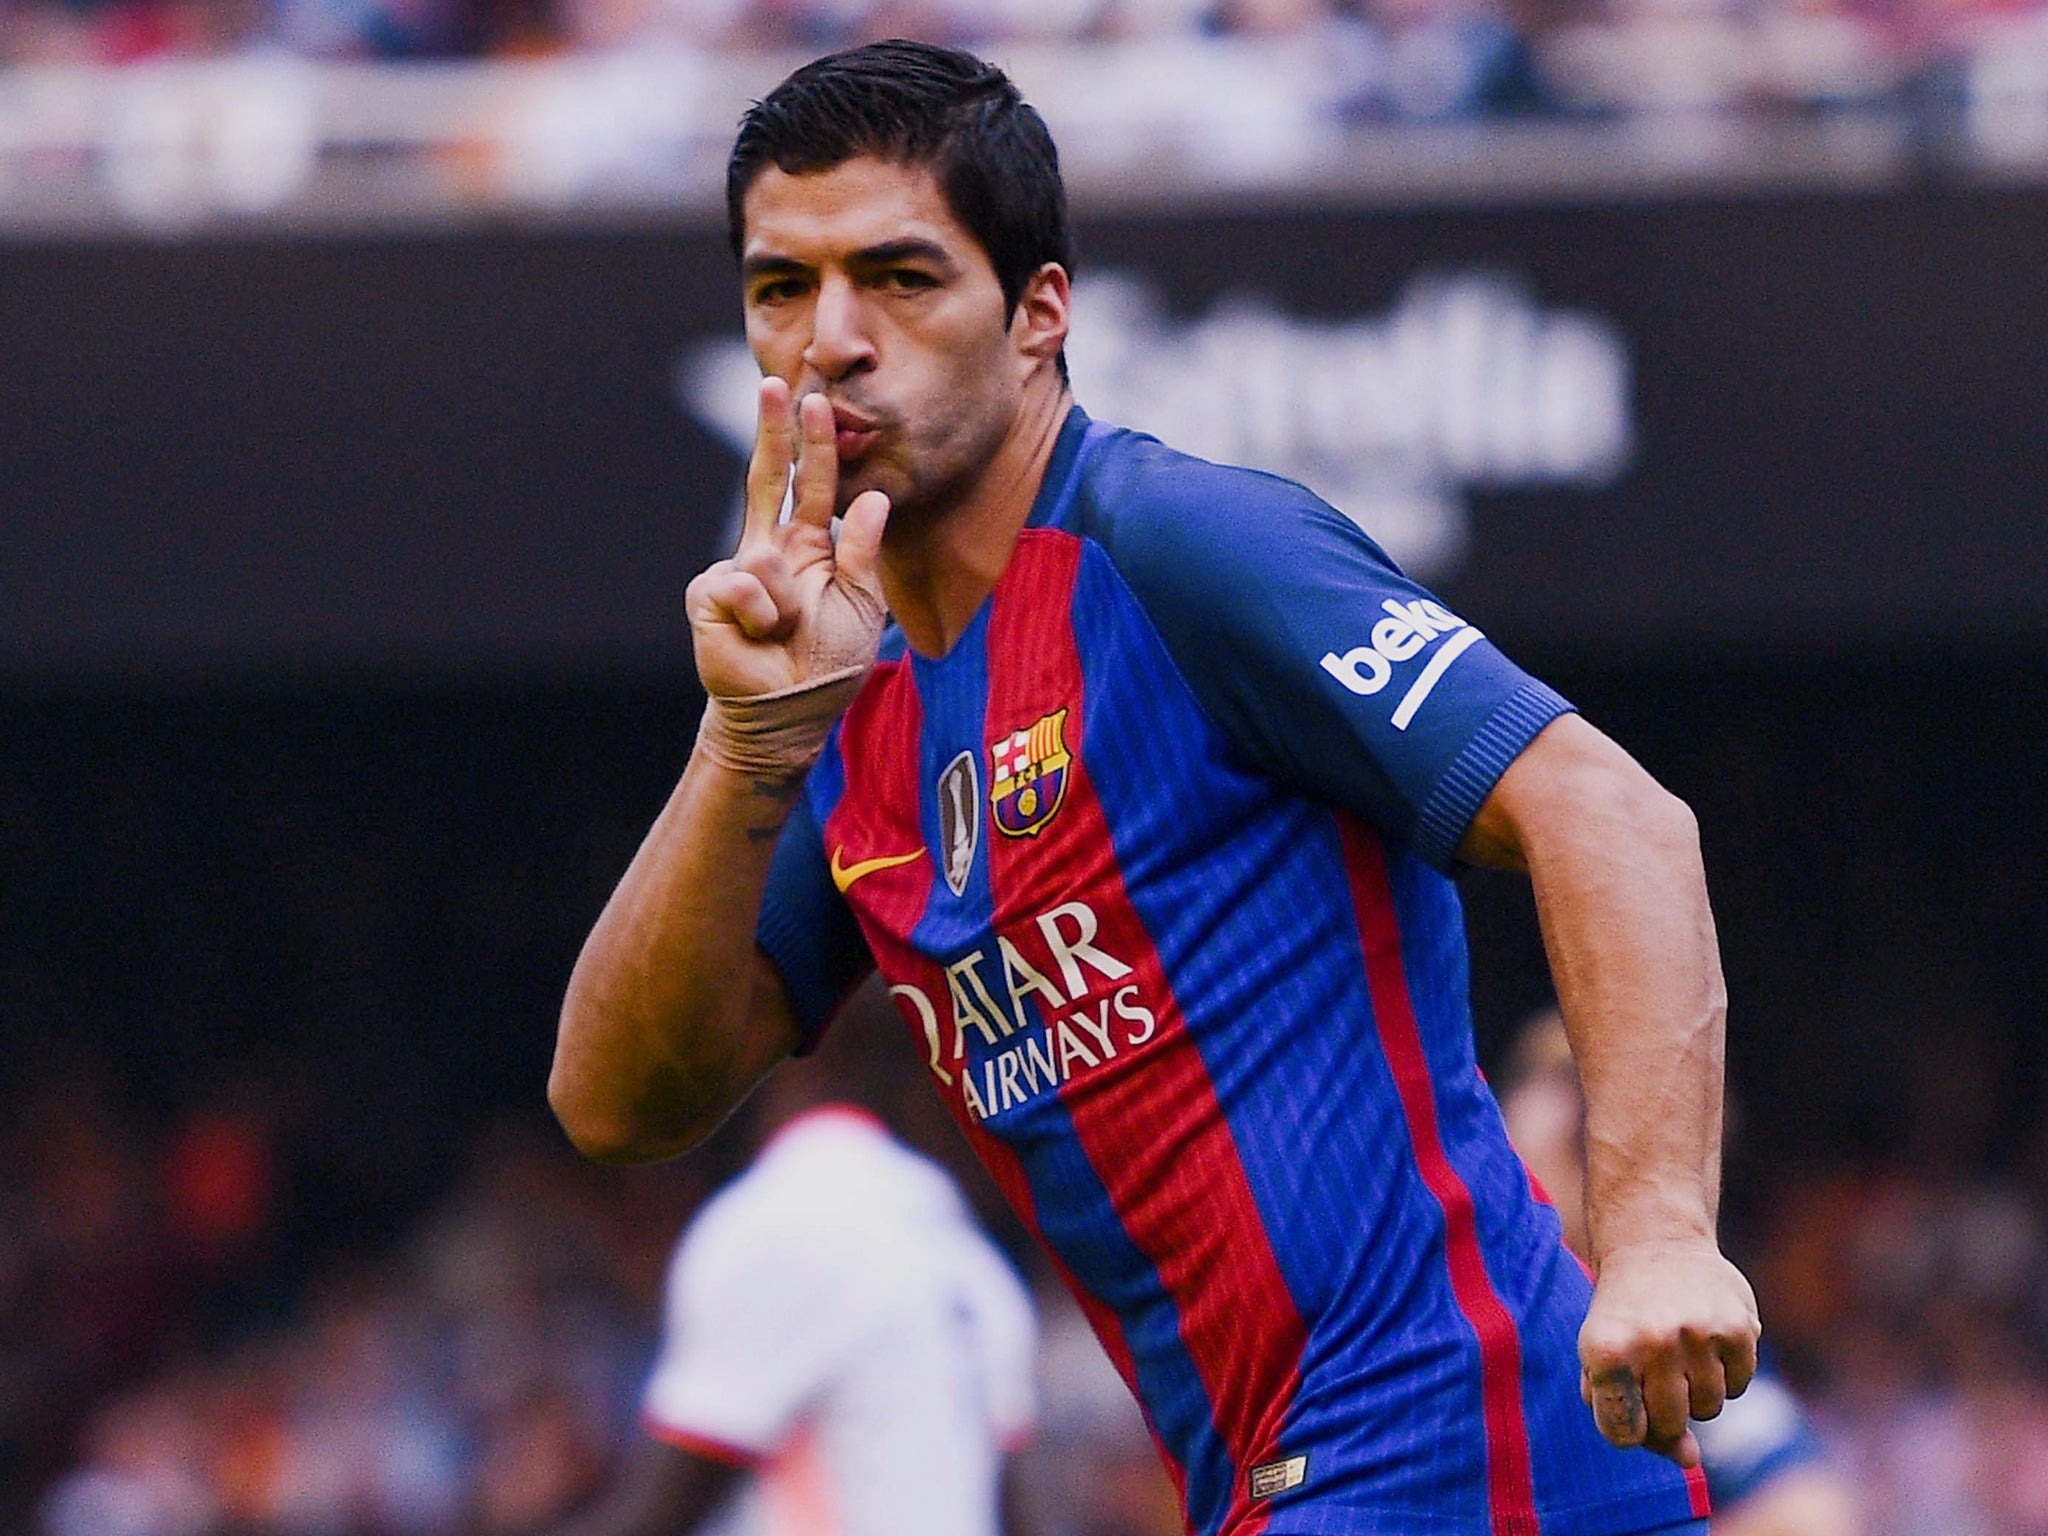 Luis Suarez netted twice in a convincing win